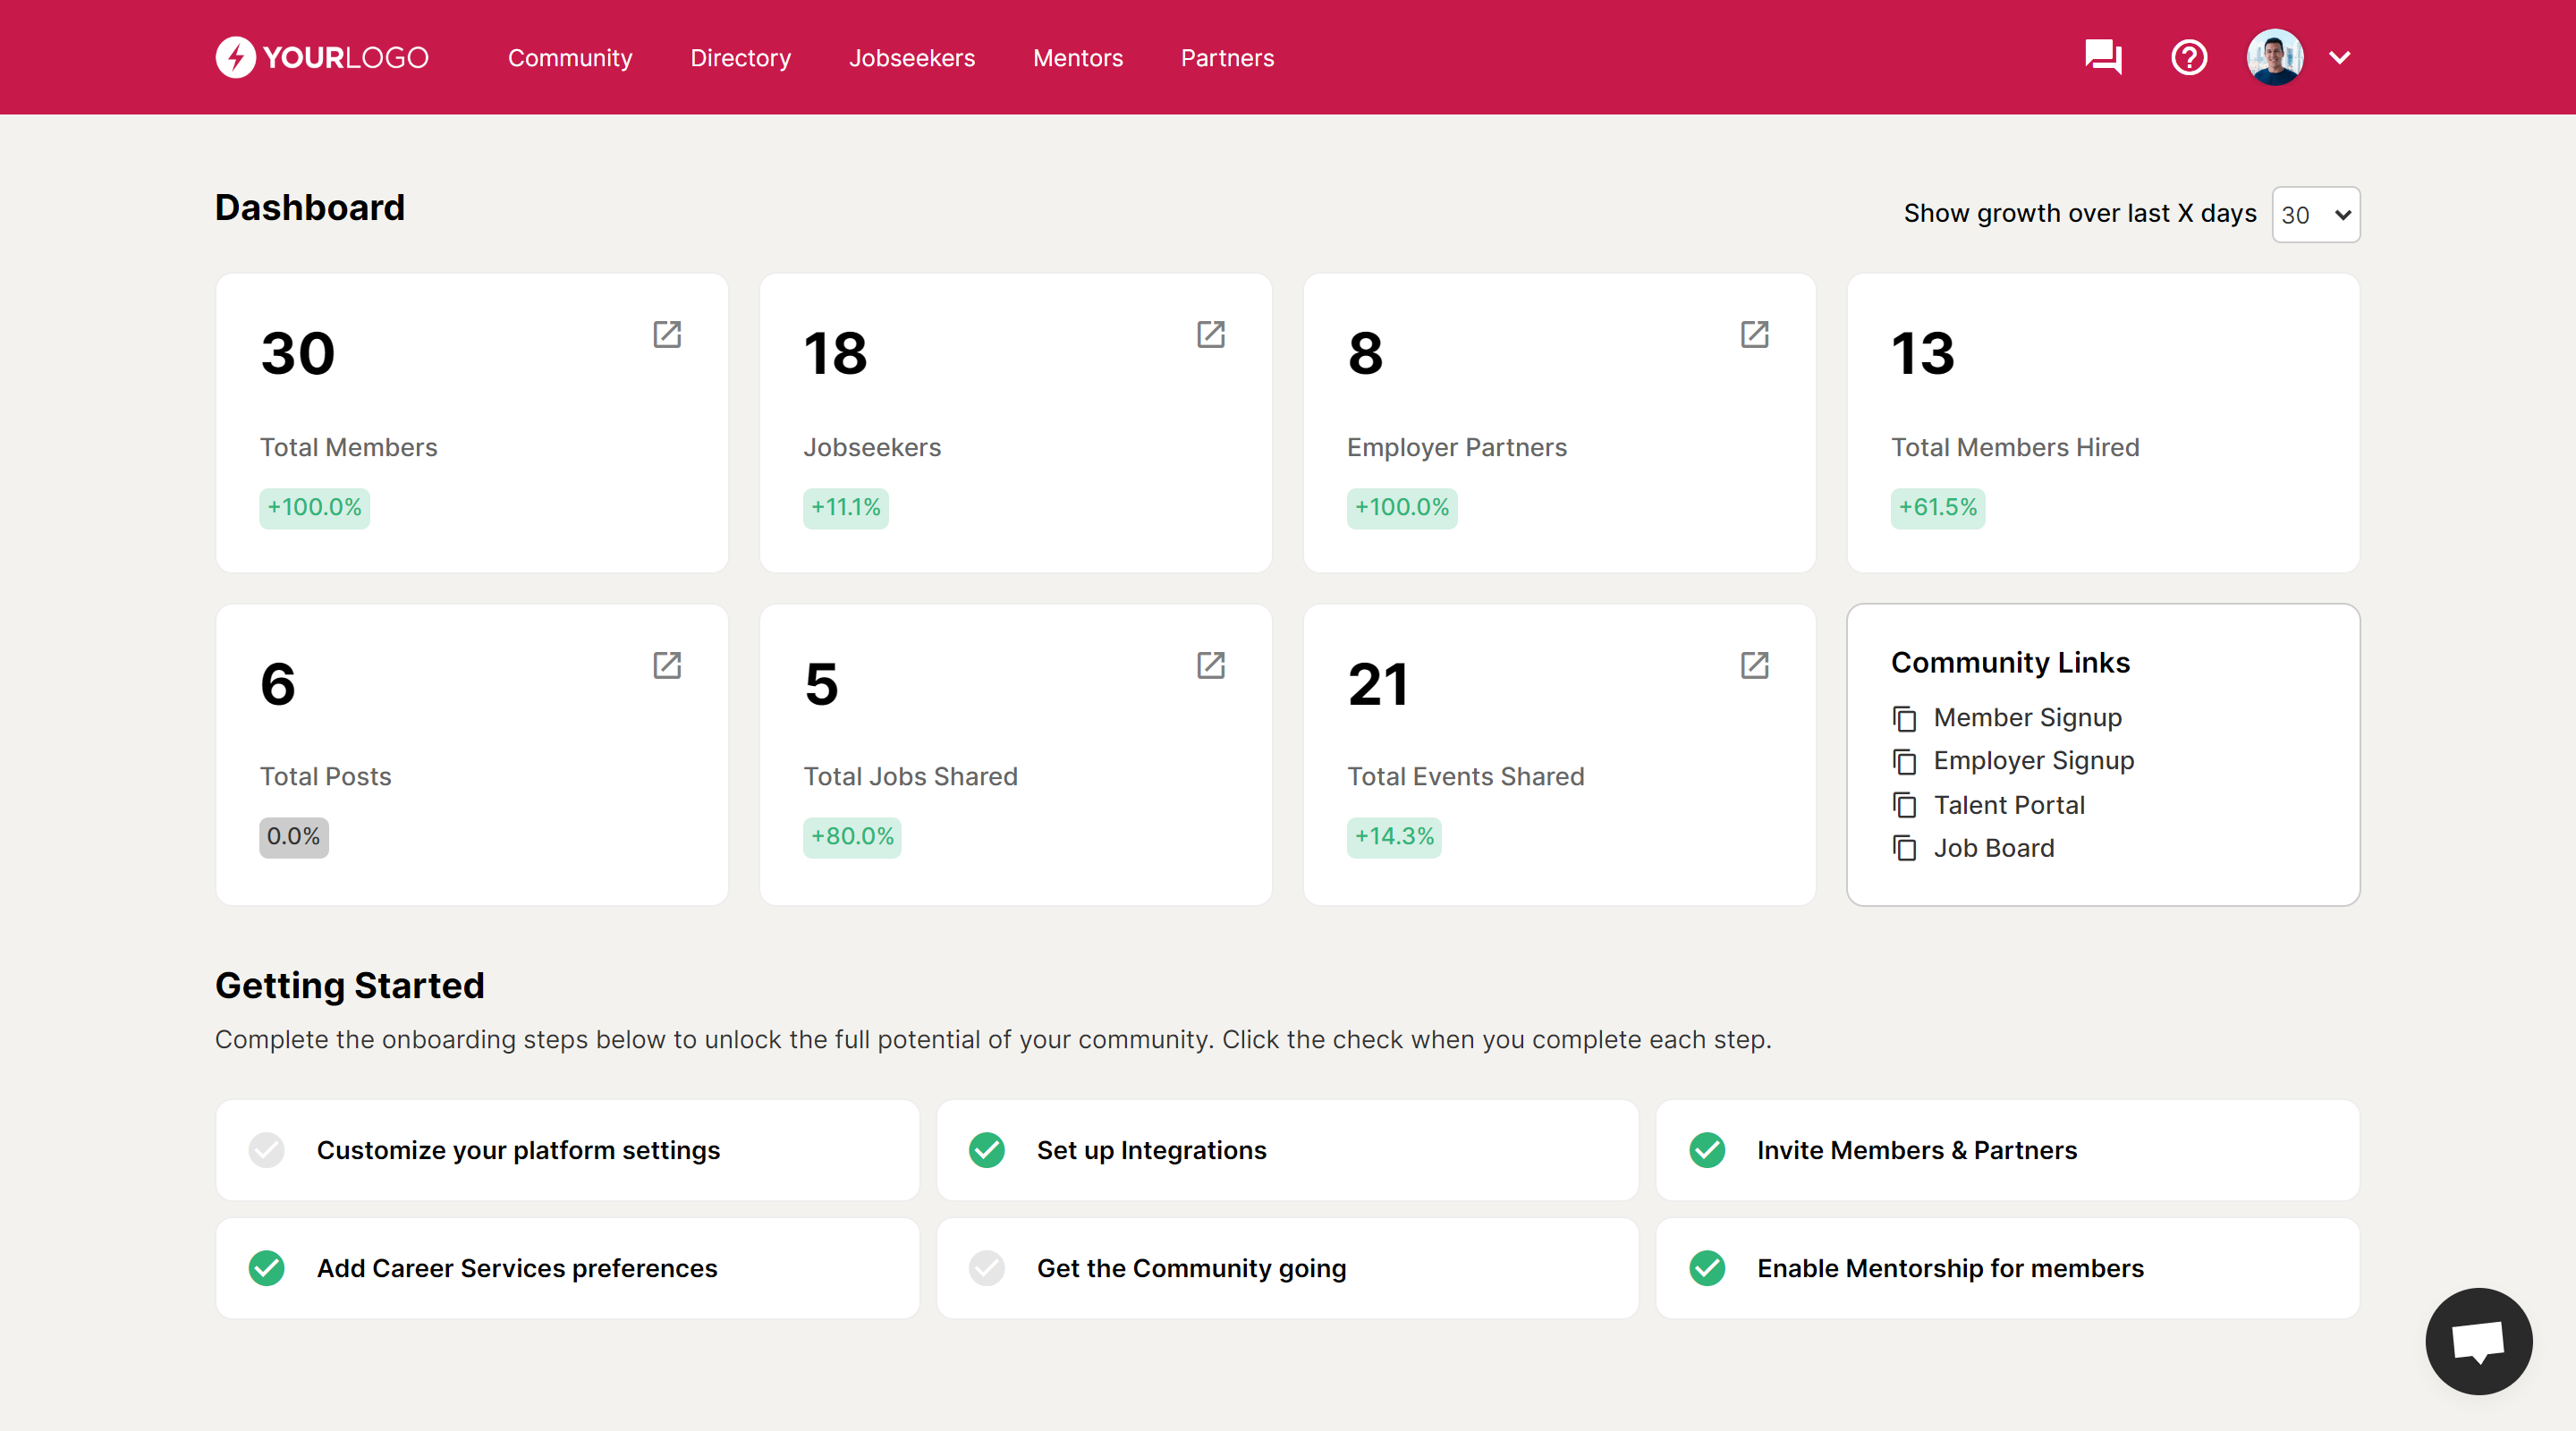 The new Jobseekers hub shows a stats bar up top, responsive view, and a table to view each jobseeker's status.